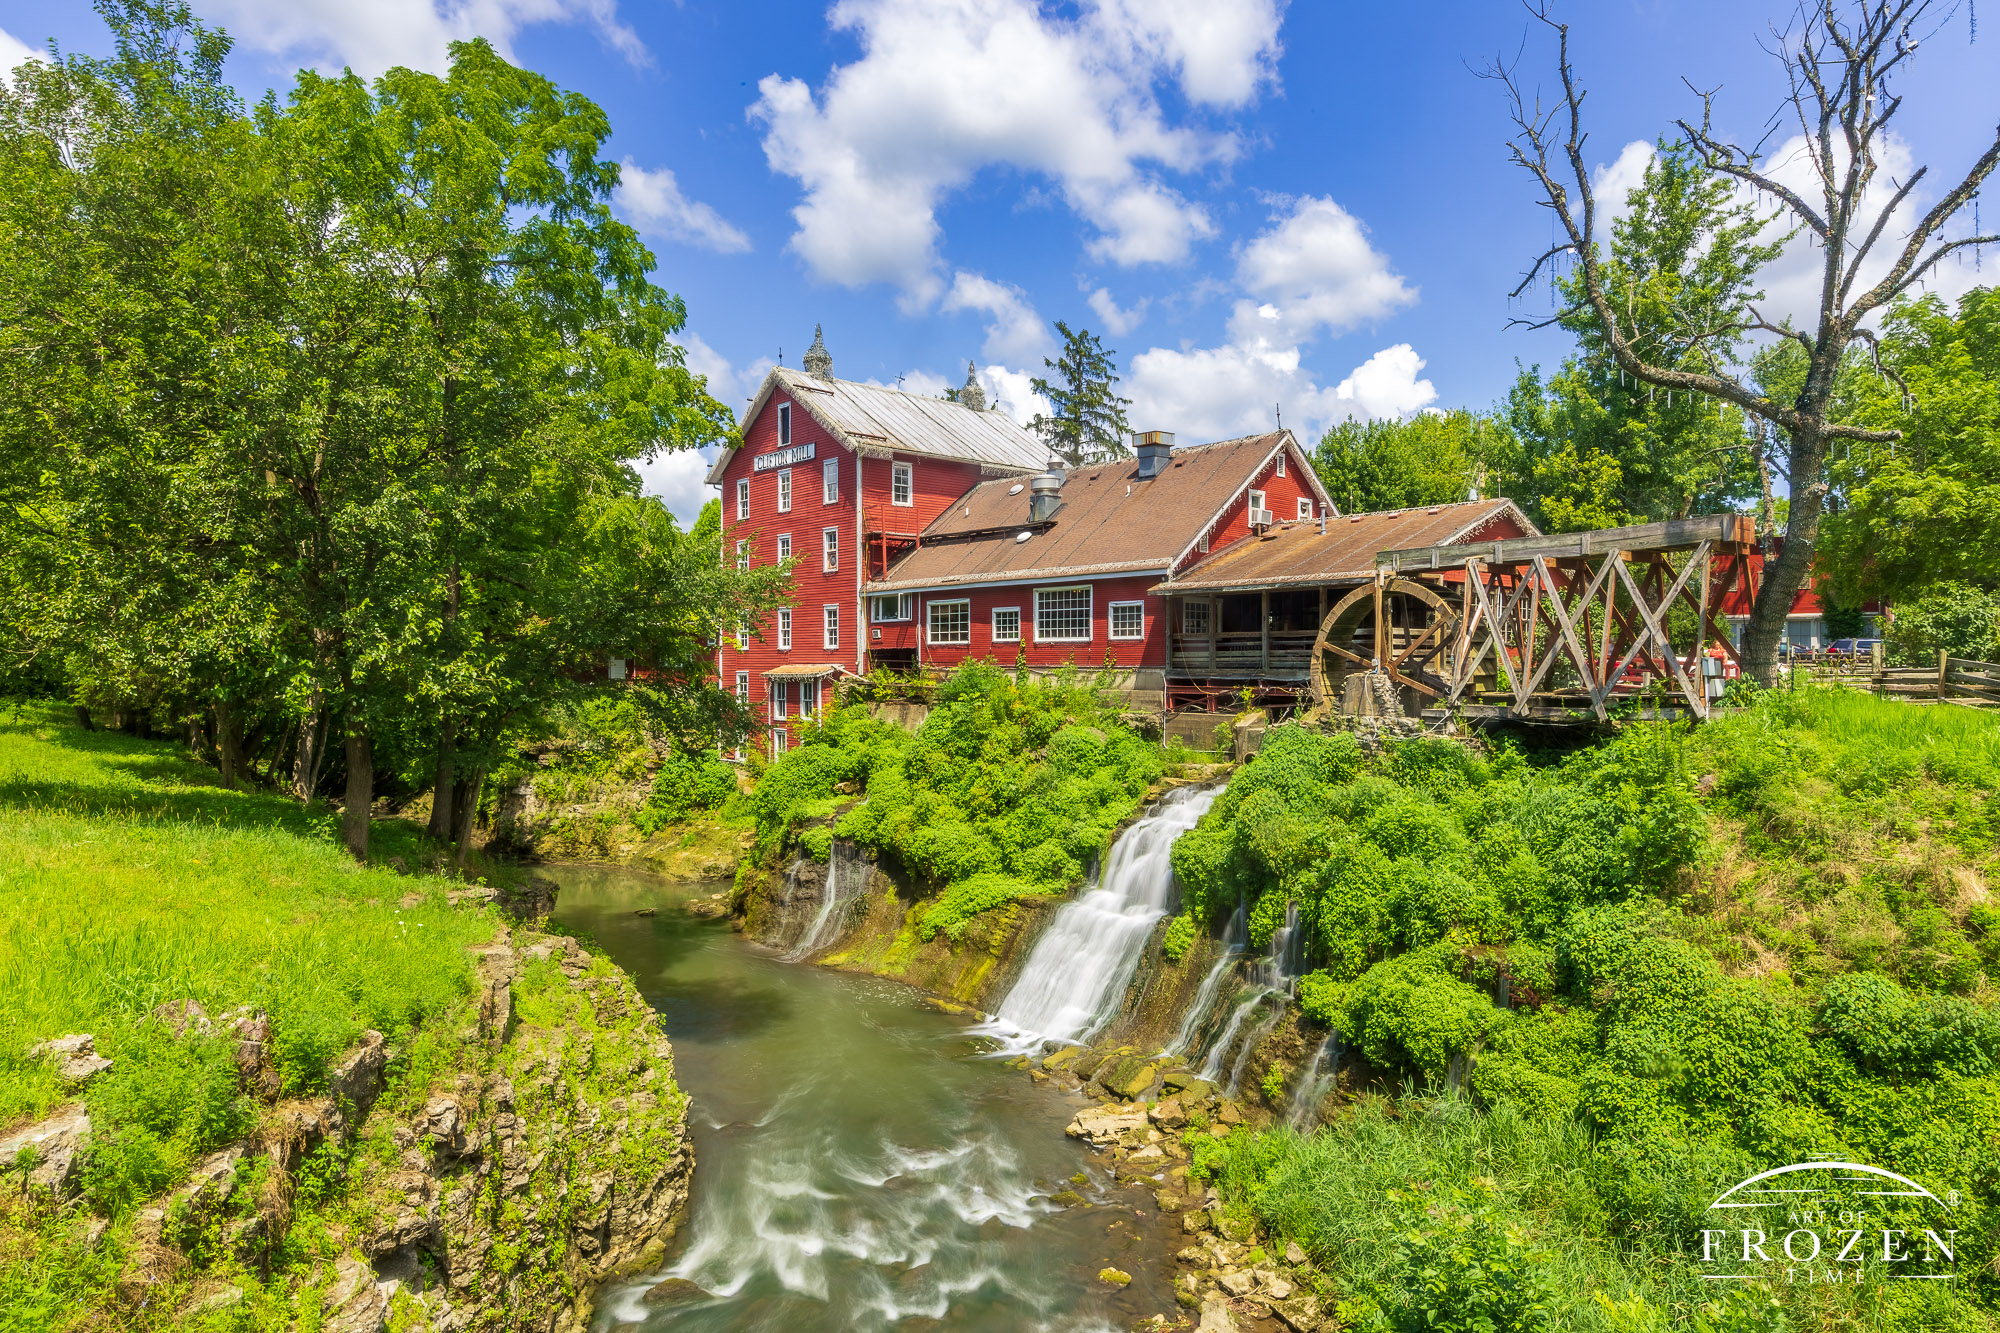 As the Little Miami River powers this grist mill, the red exterior, green plants and blue skies form complementary colors in a classic Ohio scene